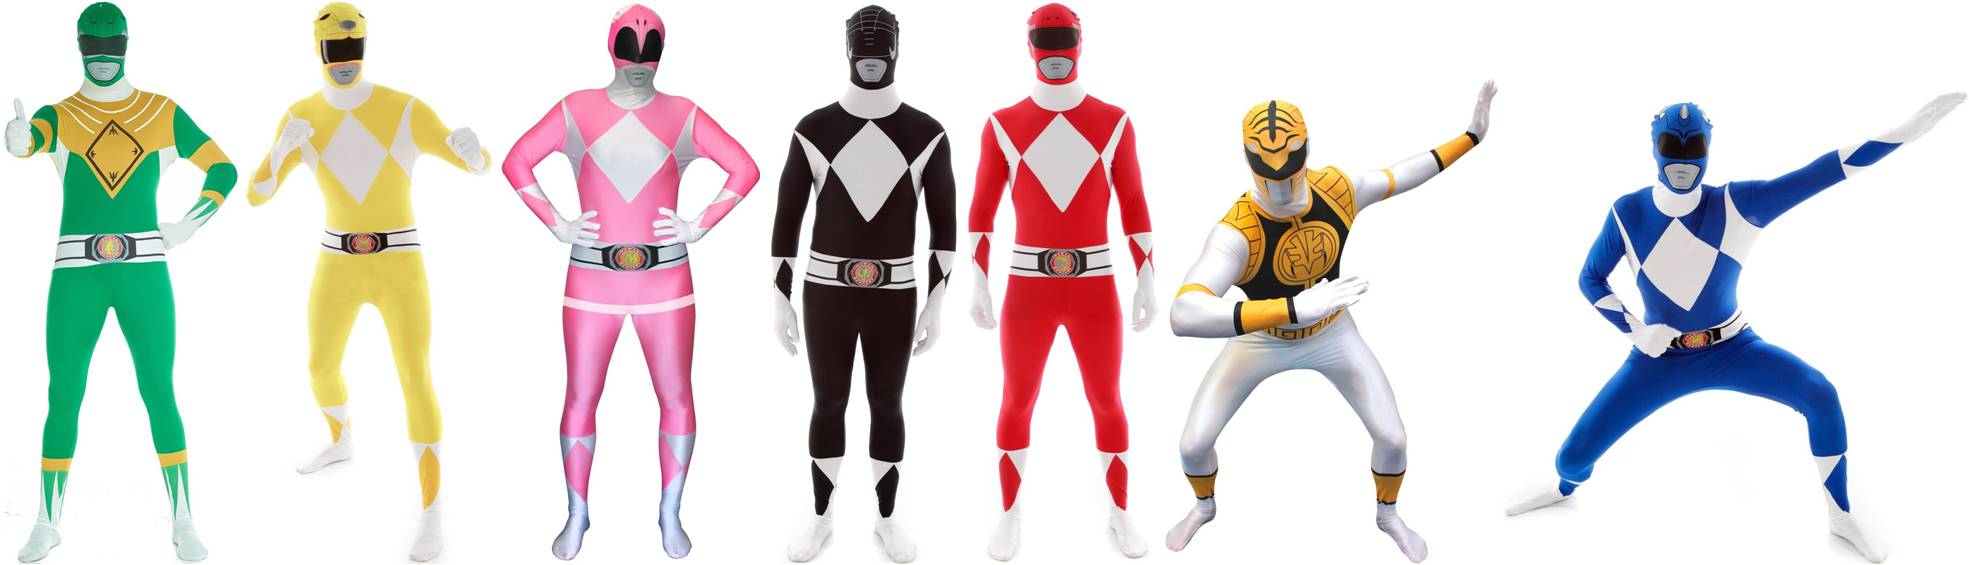 MIGHTY MORPHIN' POWER RANGER MORPHSUITS FOR ADULTS